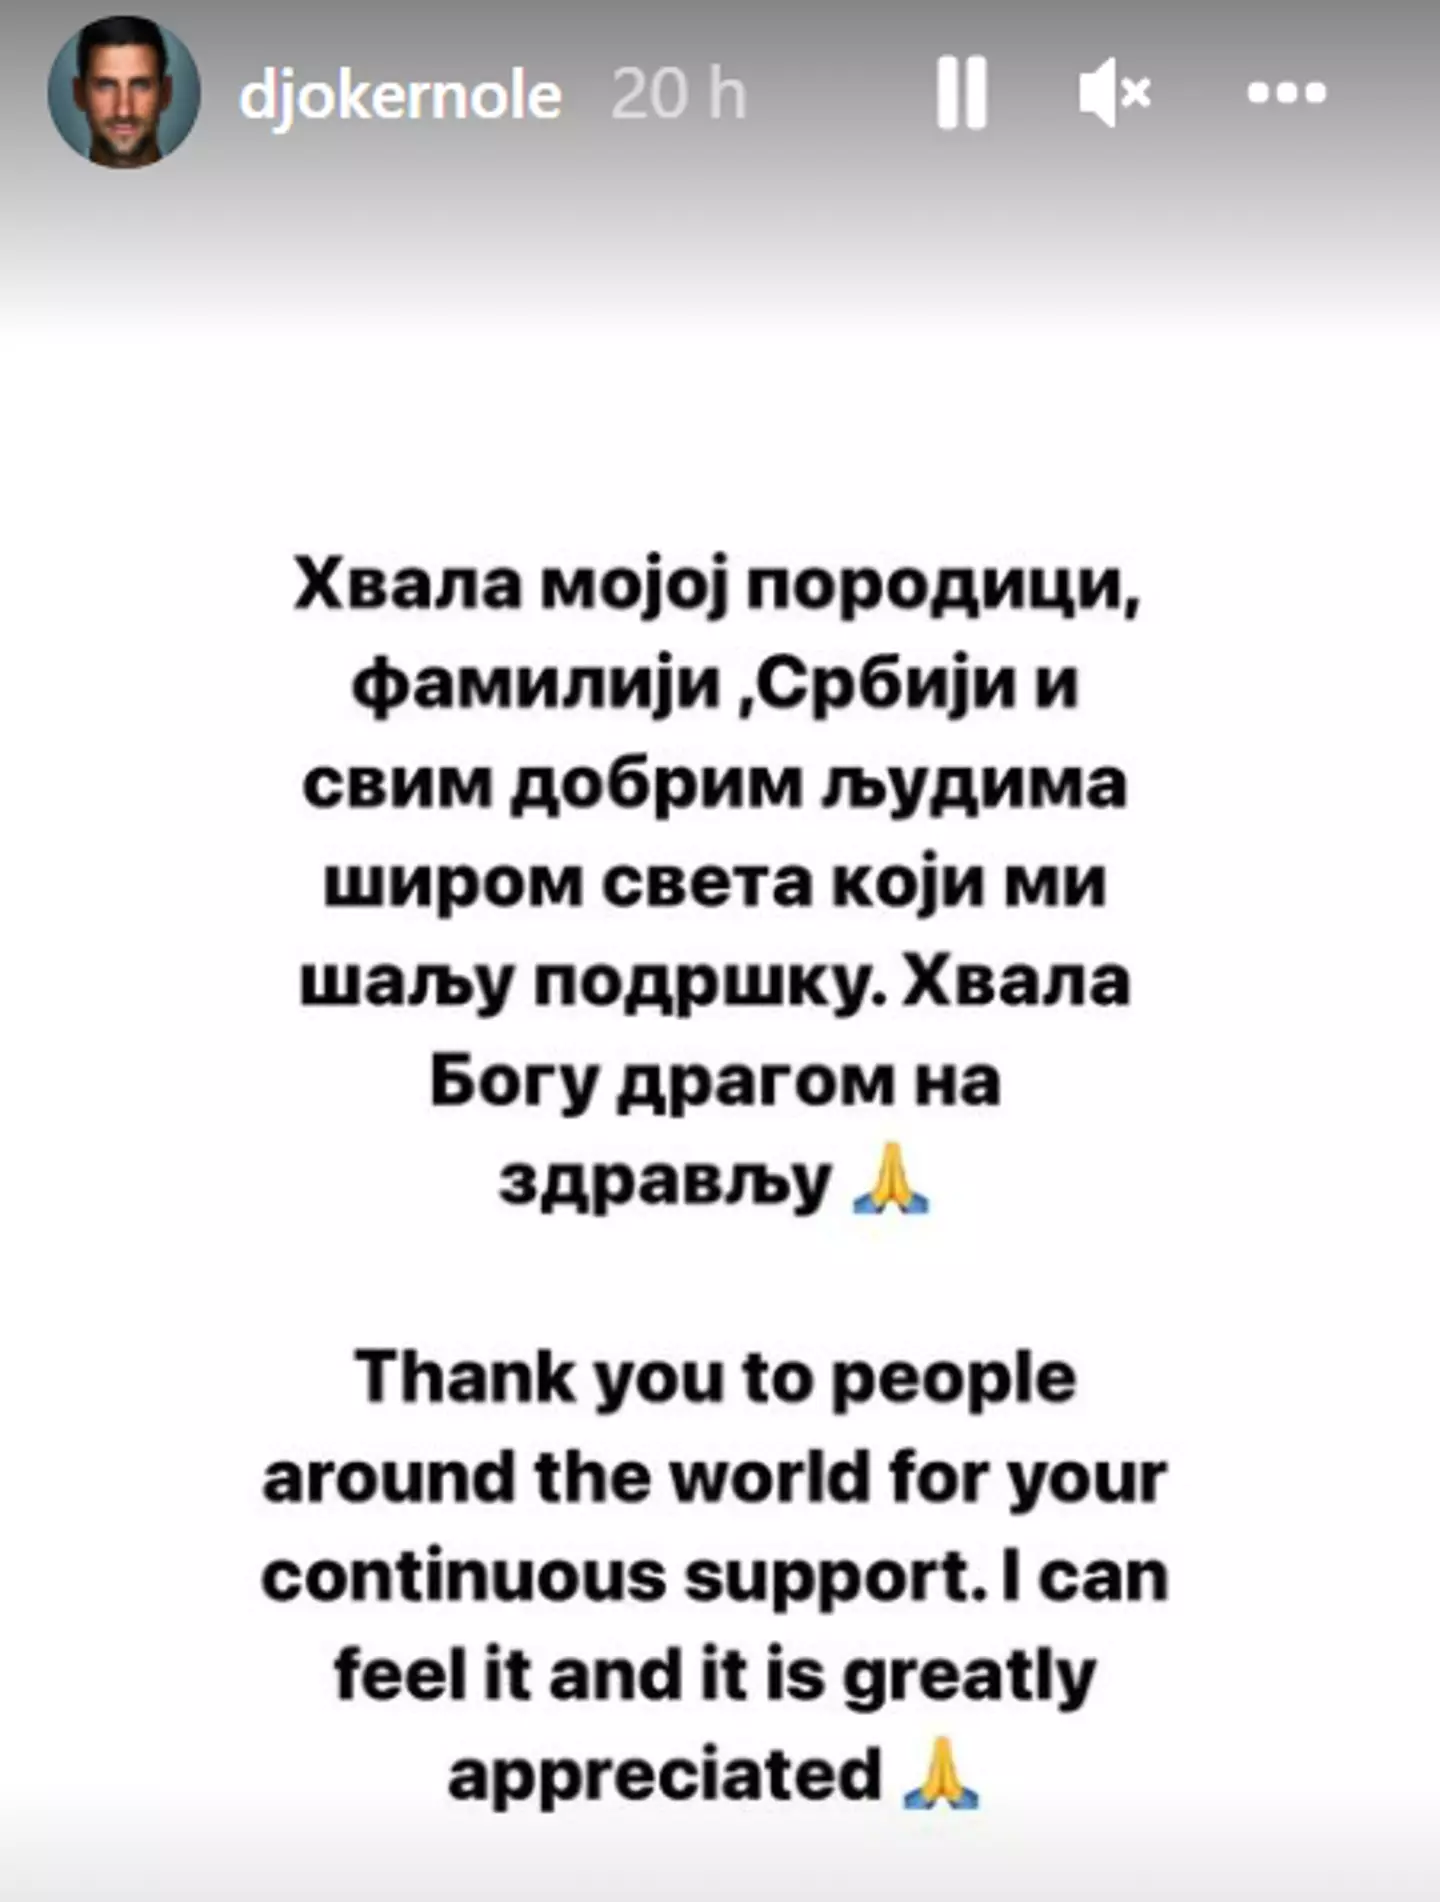 Djokovic thanked fans for their support.